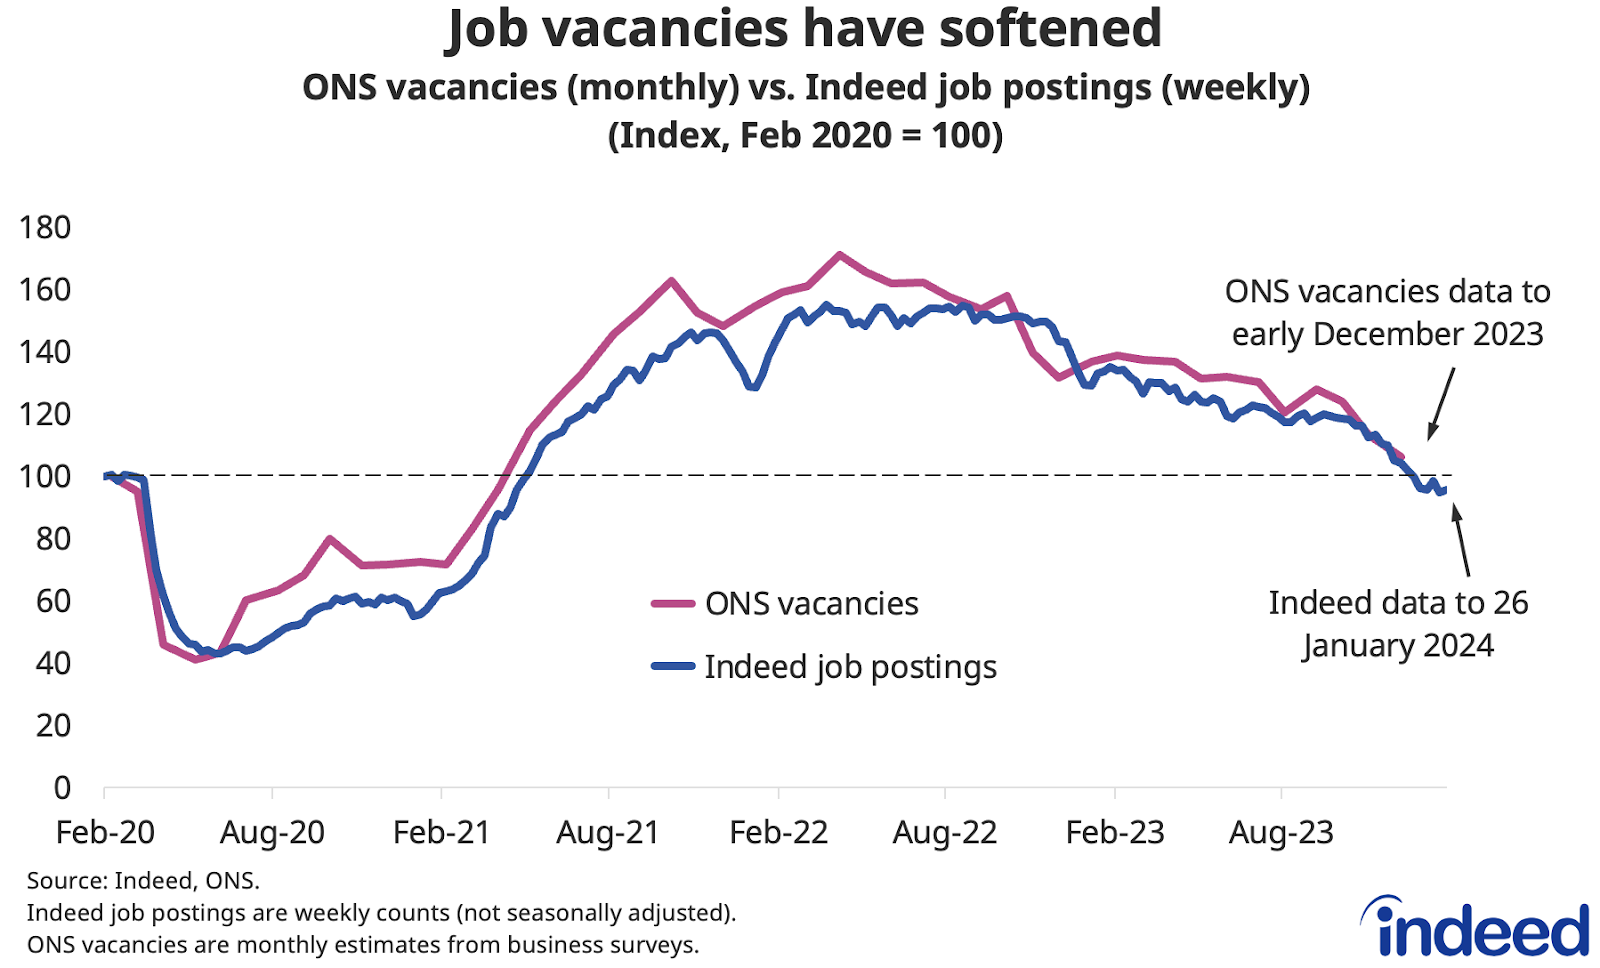 Chart titled “Job vacancies have softened” shows the trend in ONS vacancies and Indeed job postings from February 2020 to January 2024. ONS vacancies are still modestly above pre-pandemic levels, while Indeed job postings are slightly below the baseline. 